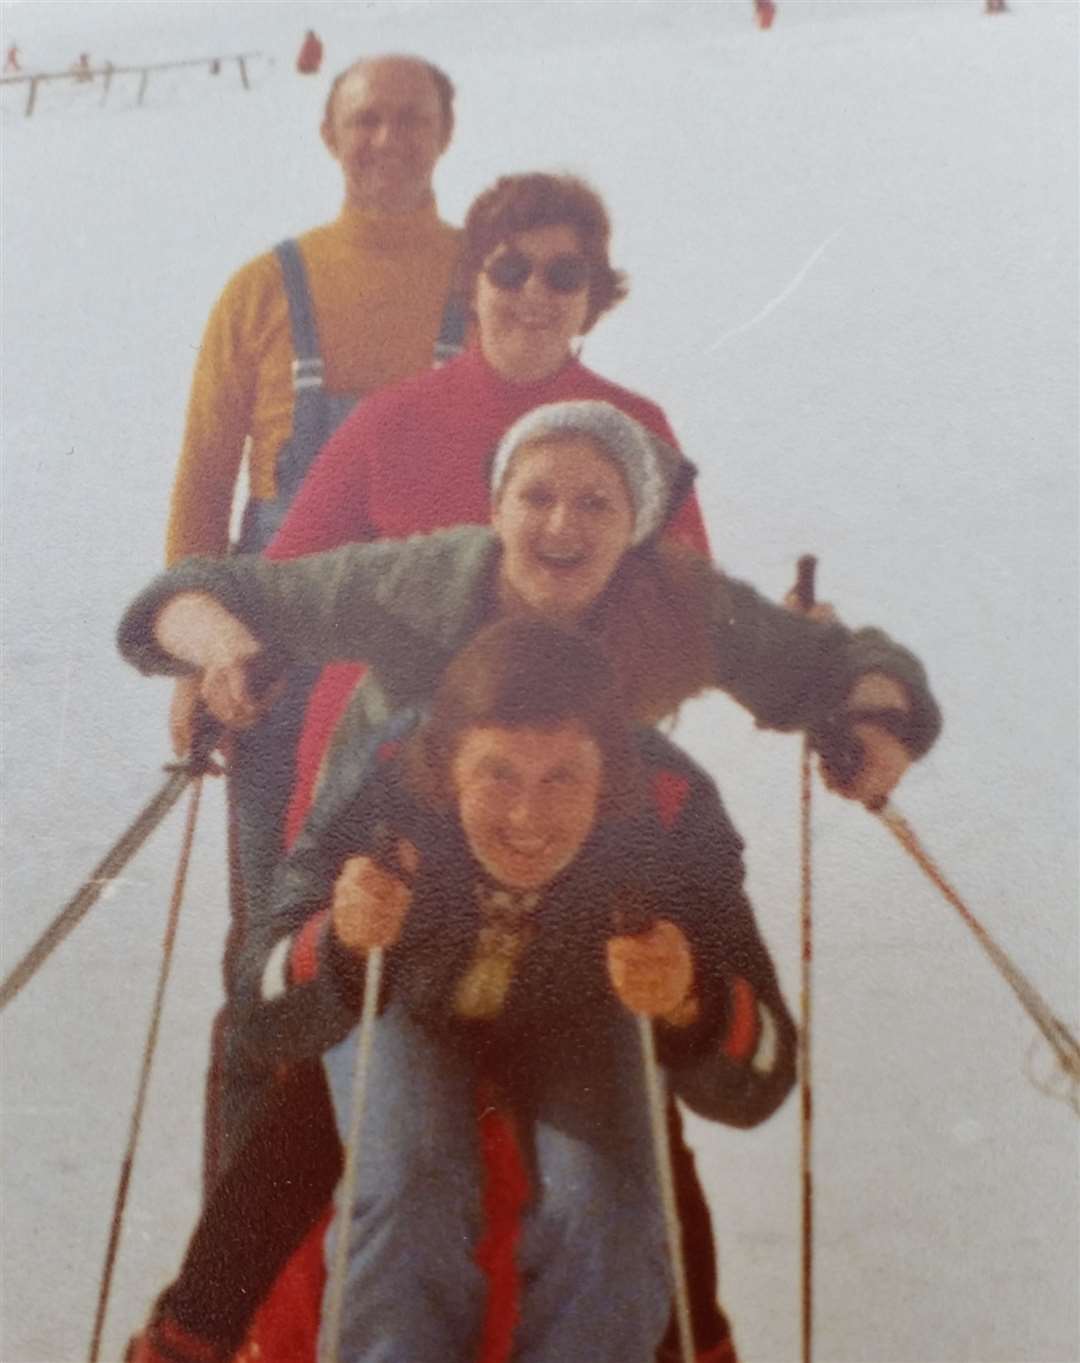 The McCarthy family from Gravesend on a skiing trip together